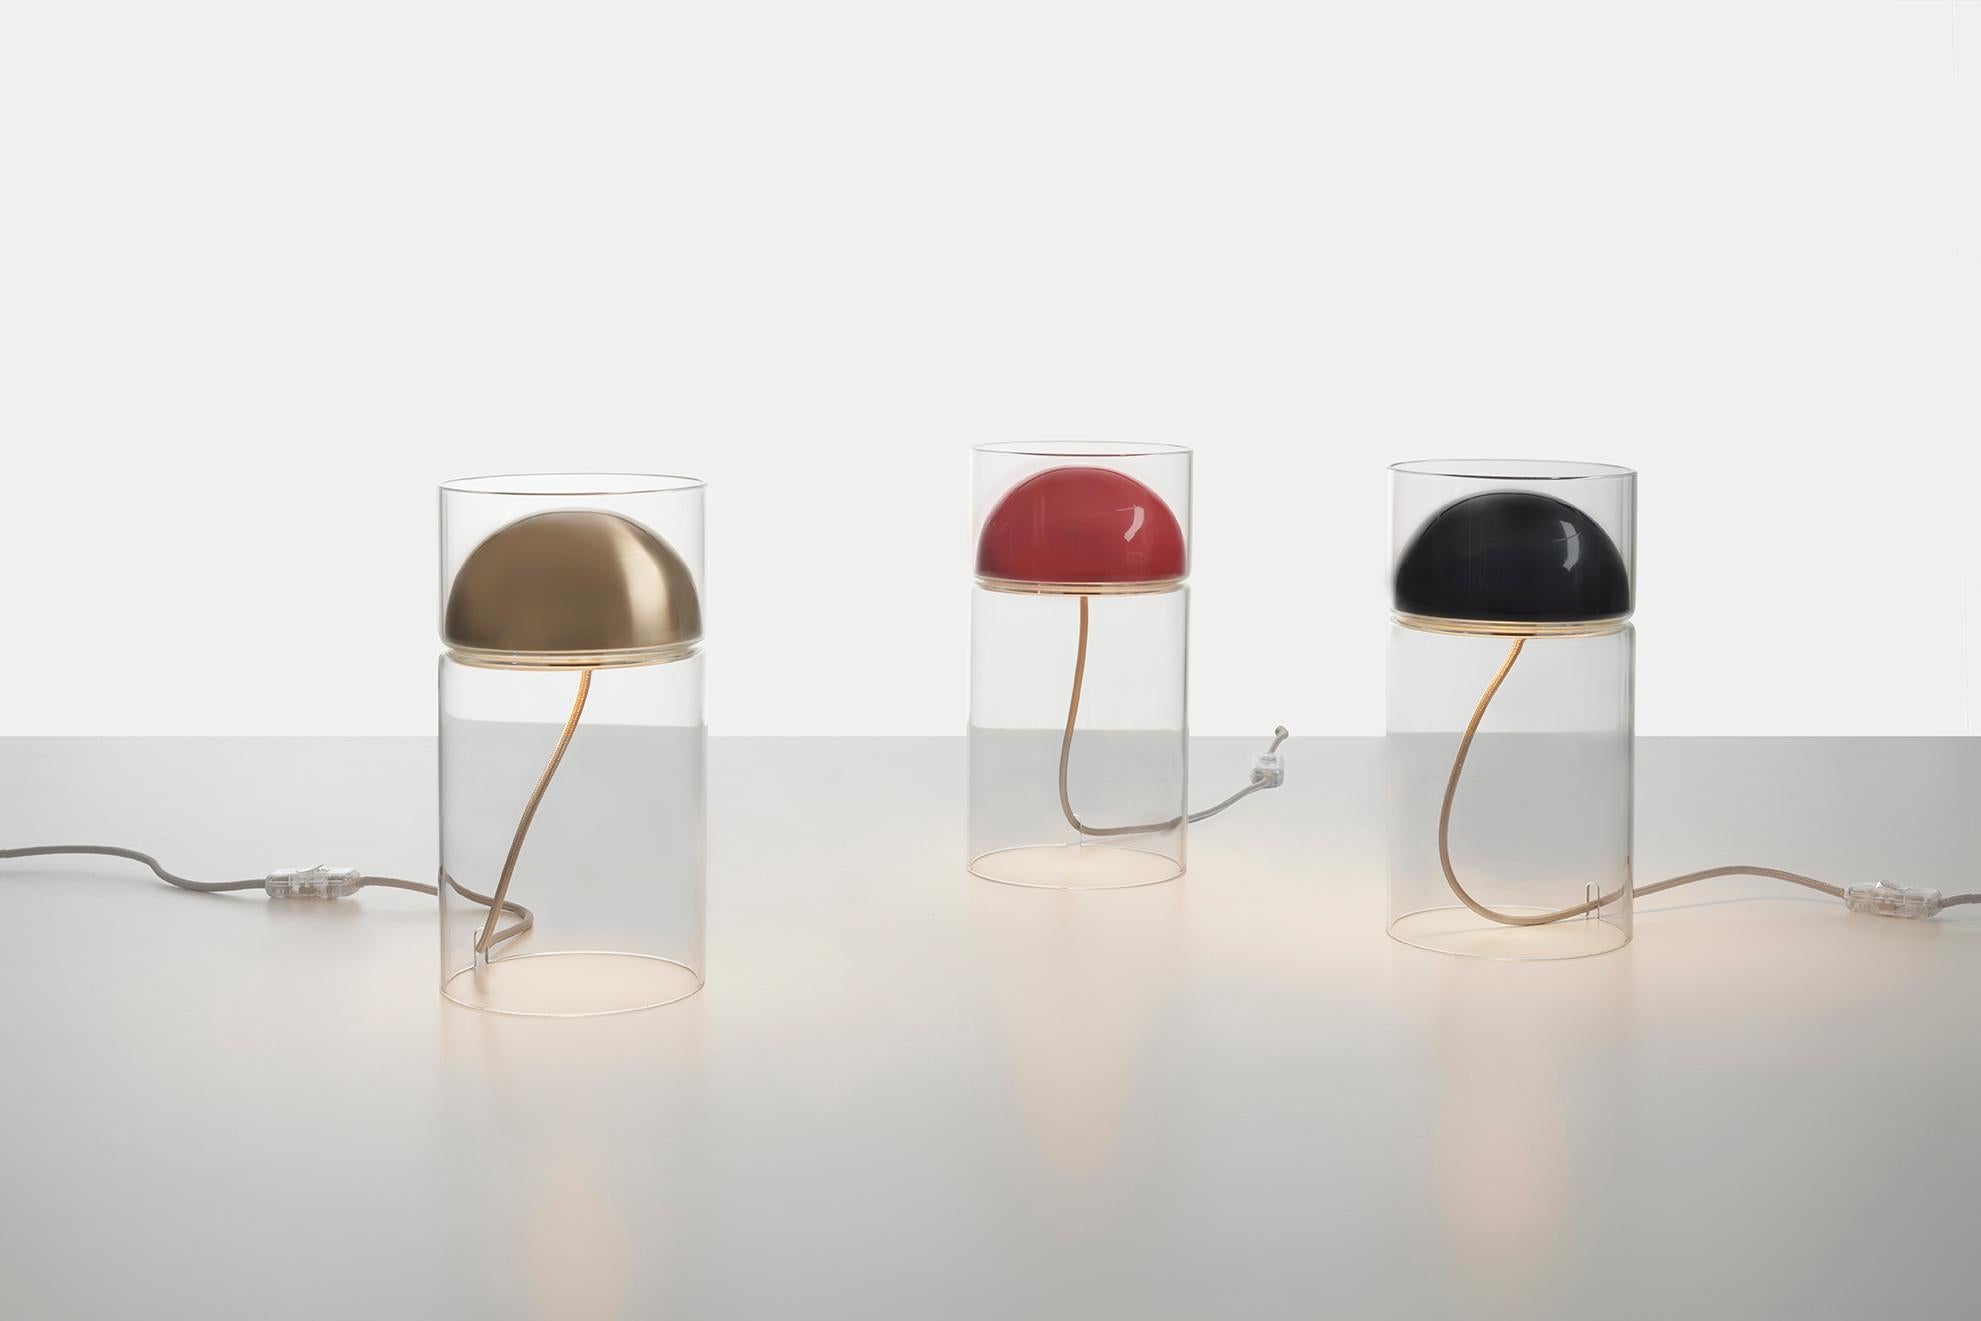 Formal minimalism for a soft, warm light. Medusa is a glass table lamp based on the elementary principle of incorporating a metal dome into a cylinder: the dome contains the light source and the glass cylinder delicately distributes the light over